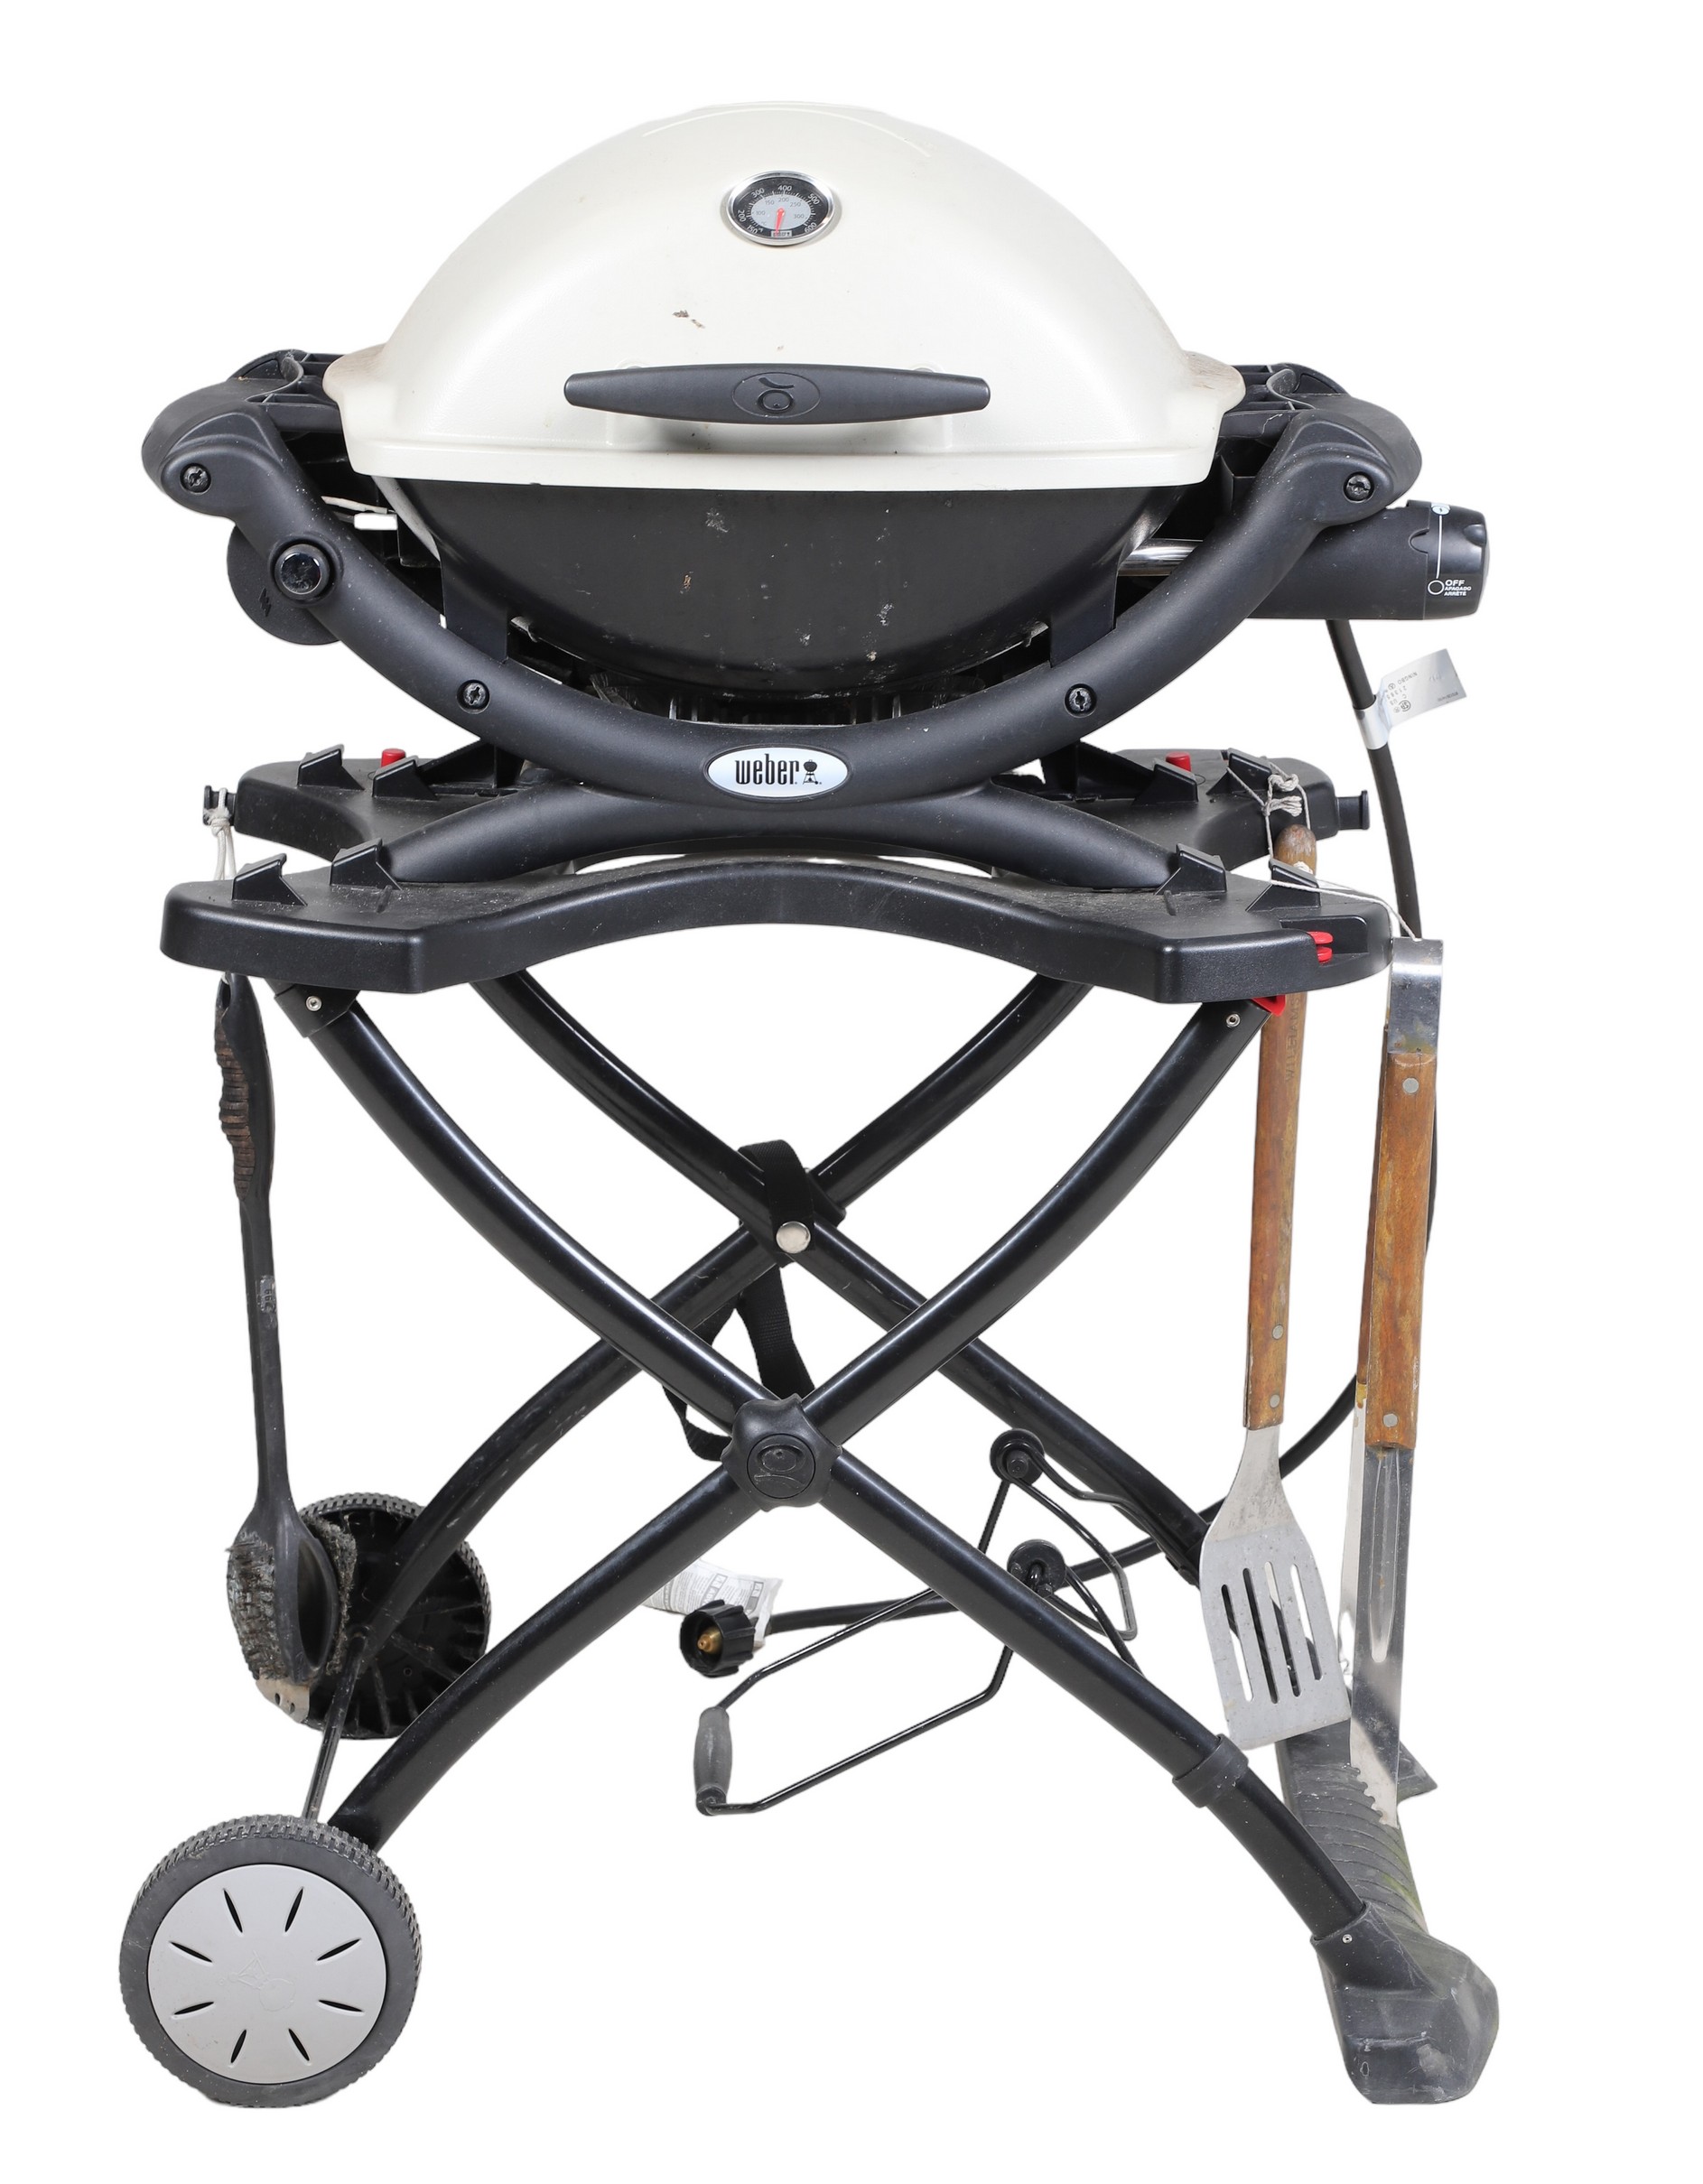 Small Weber grill on stationary